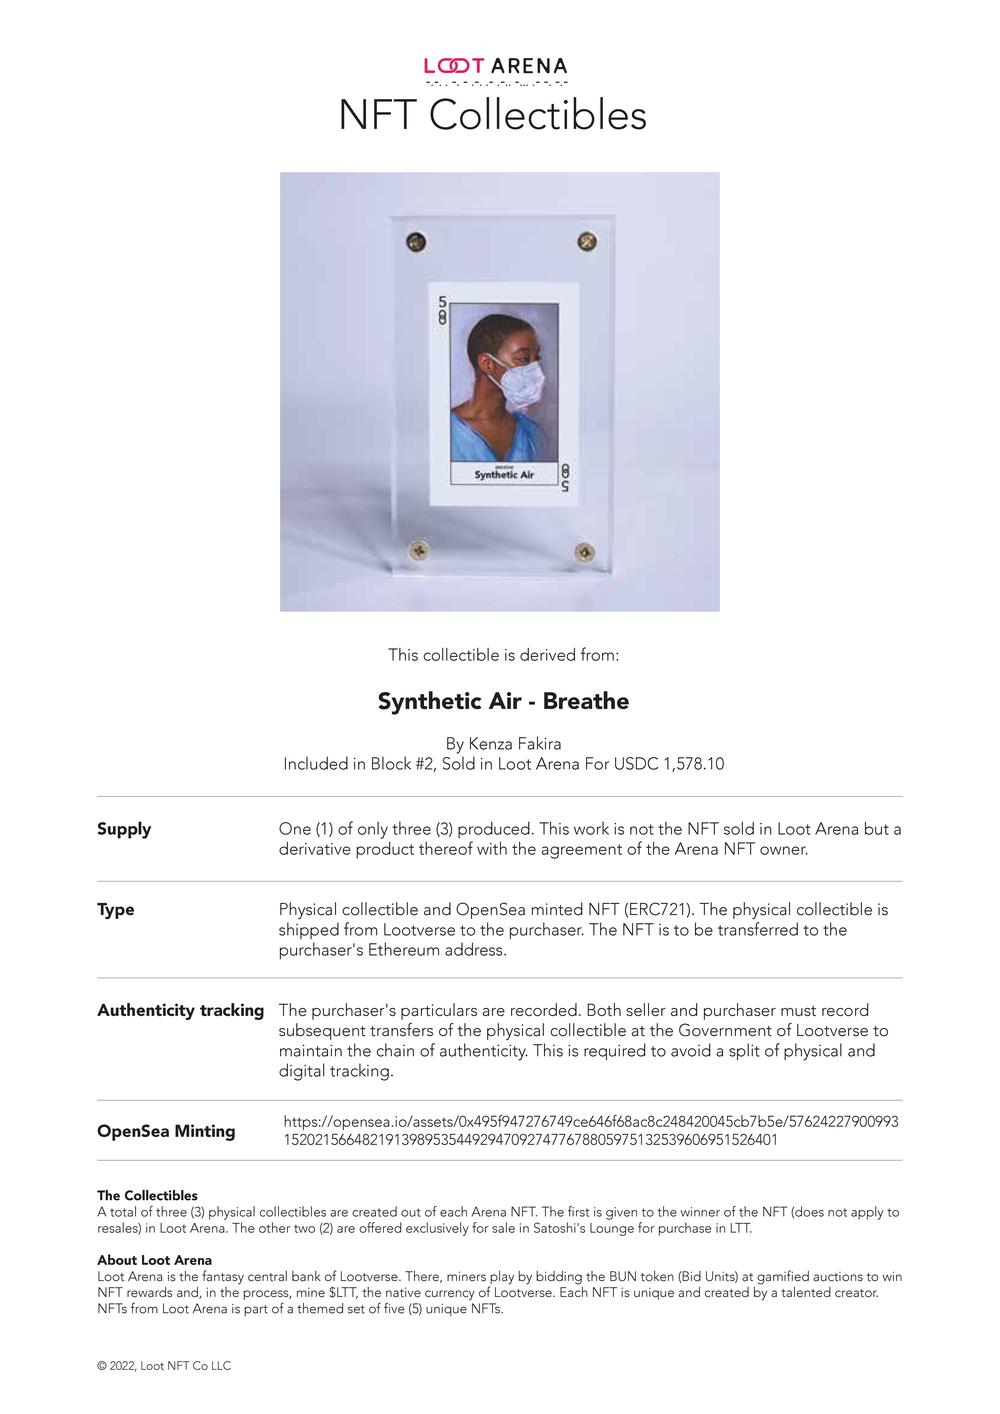 Synthetic Air_#1 Collectible_Contract.pdf